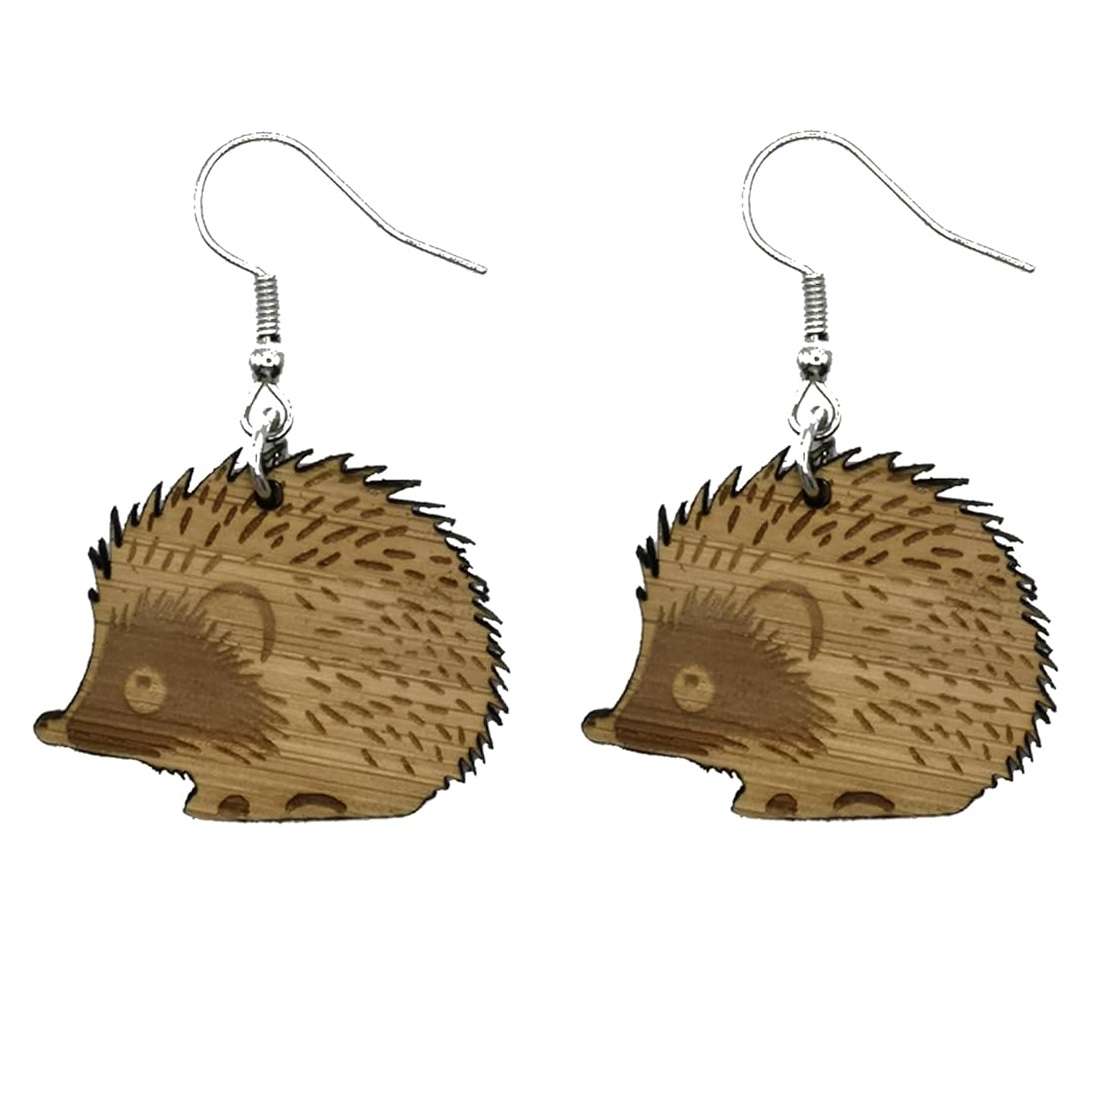 Hedgehog Bamboo Earrings – customise to suit your style with Gold, Rose Gold or Silver findings